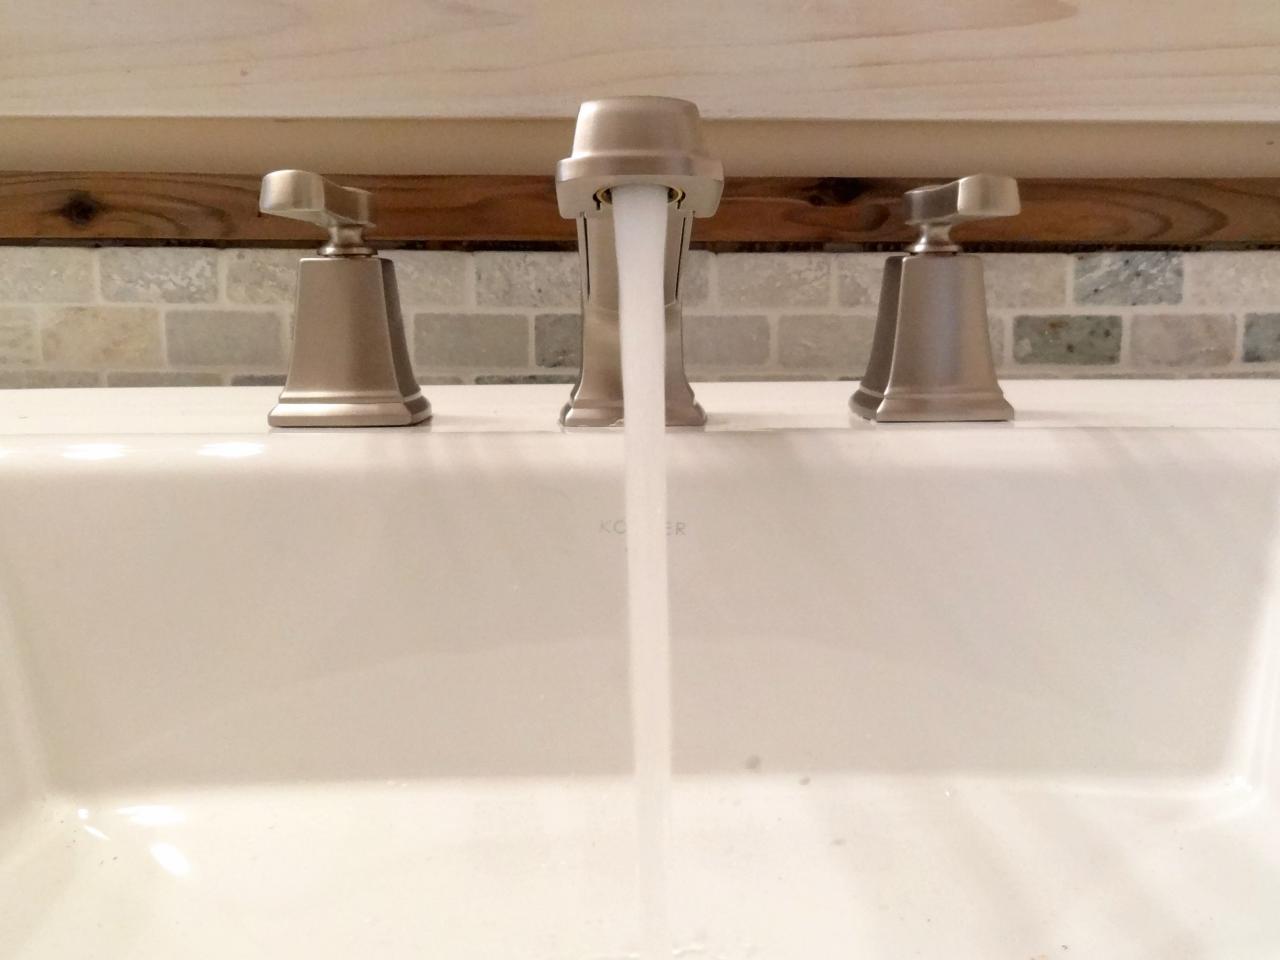 How To Replace A Bathroom Faucet, How To Replace Bathroom Sink